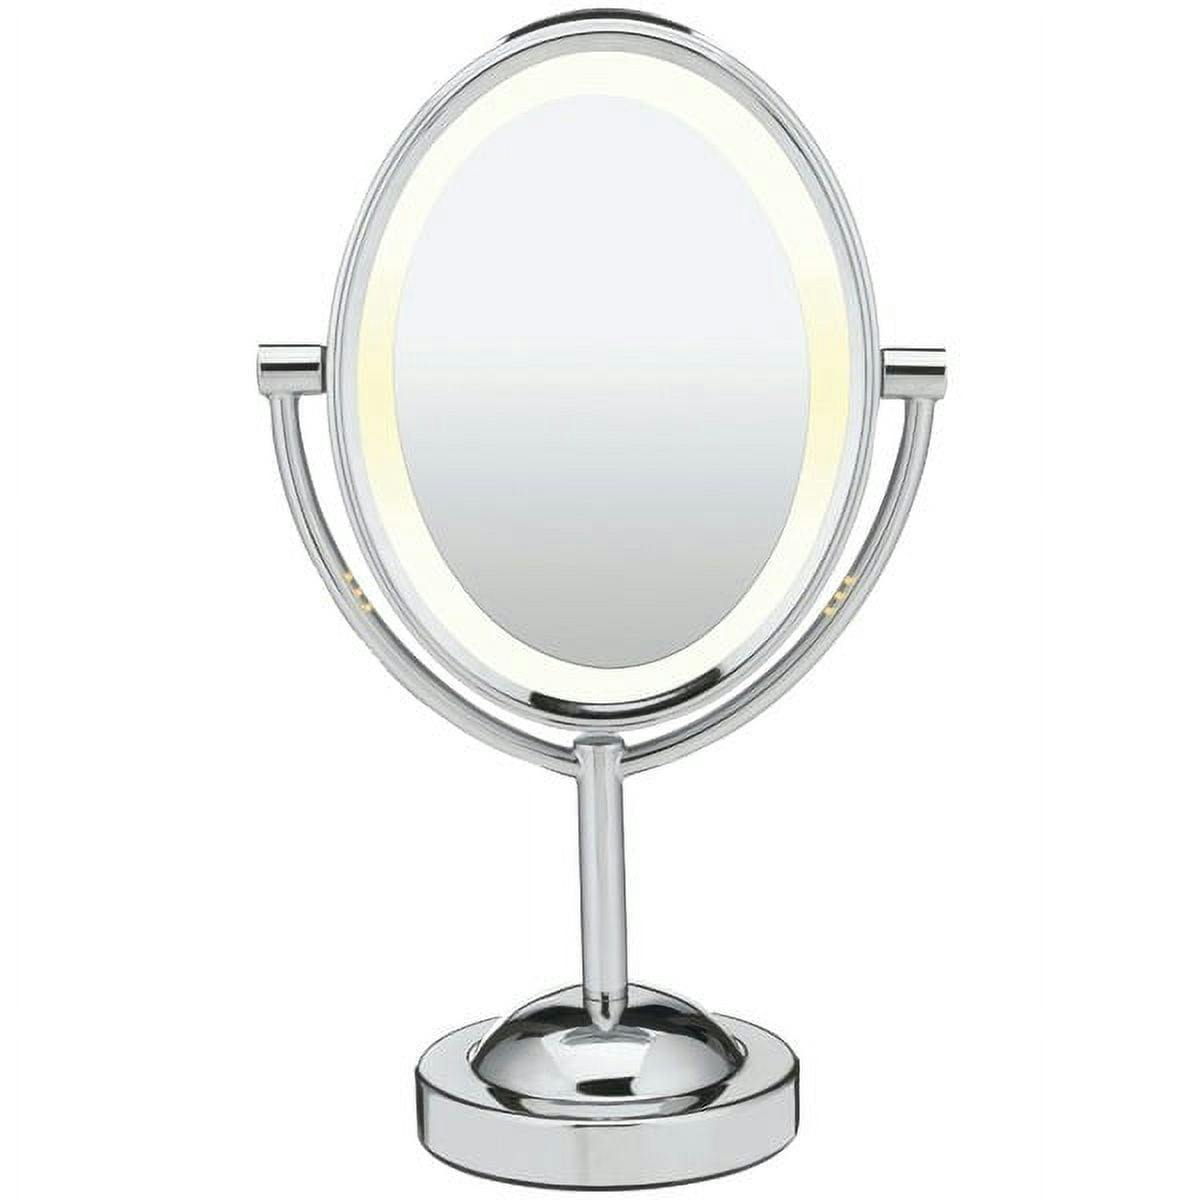 Polished Chrome Oval LED Lighted Vanity Mirror, 1X/7X Magnification